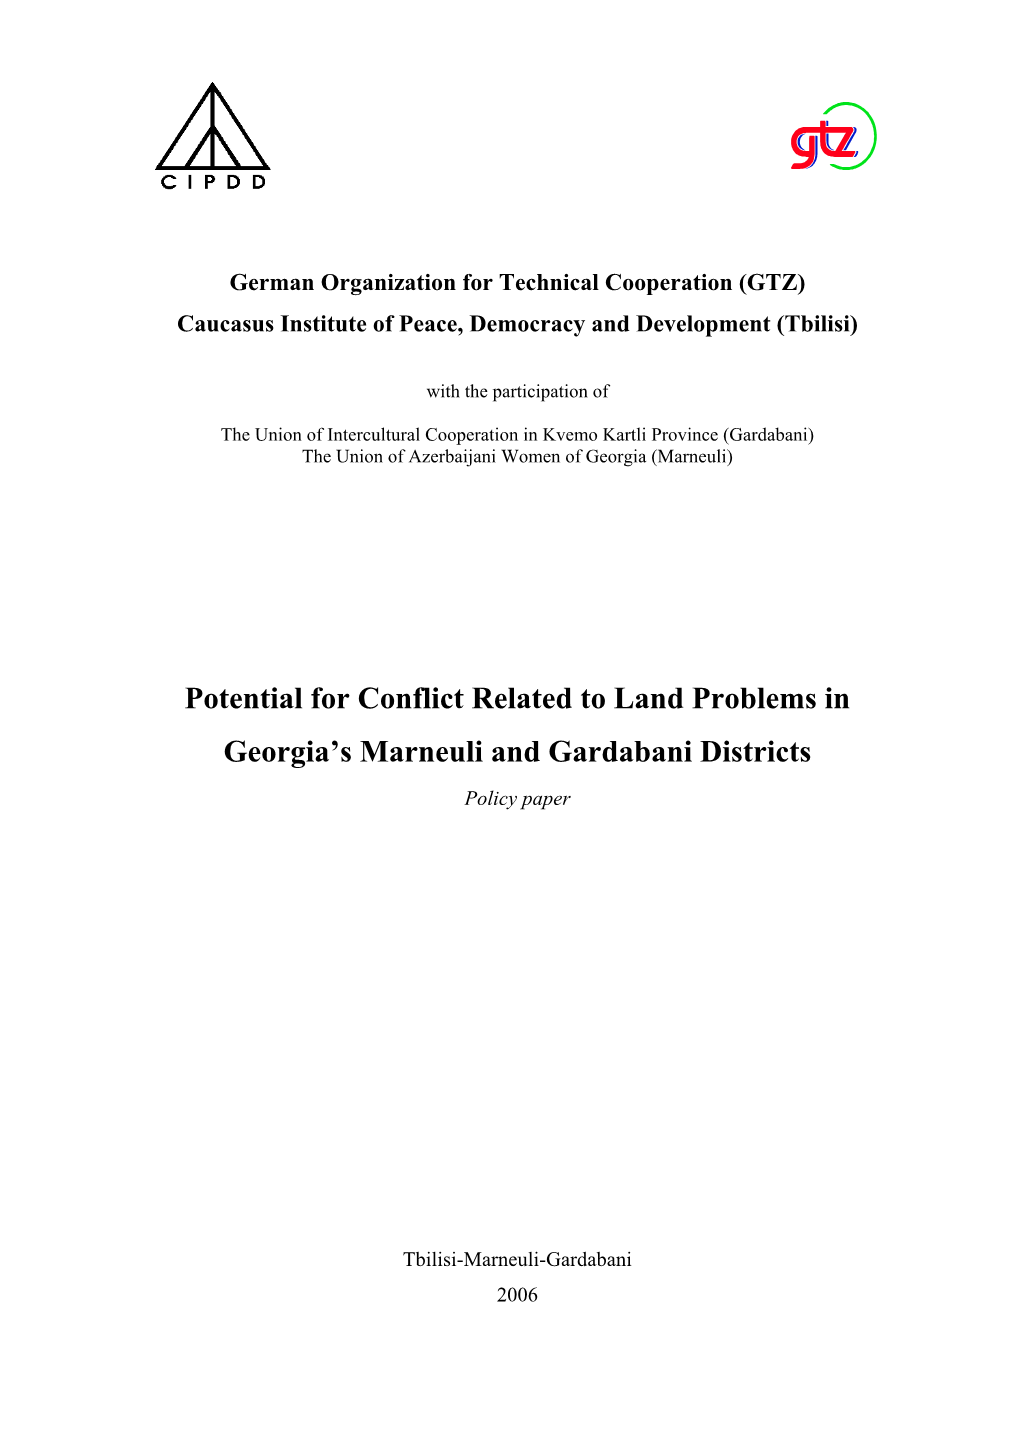 Potential for Conflict Related to Land Problems in Georgia's Marneuli and Gardabani Districts